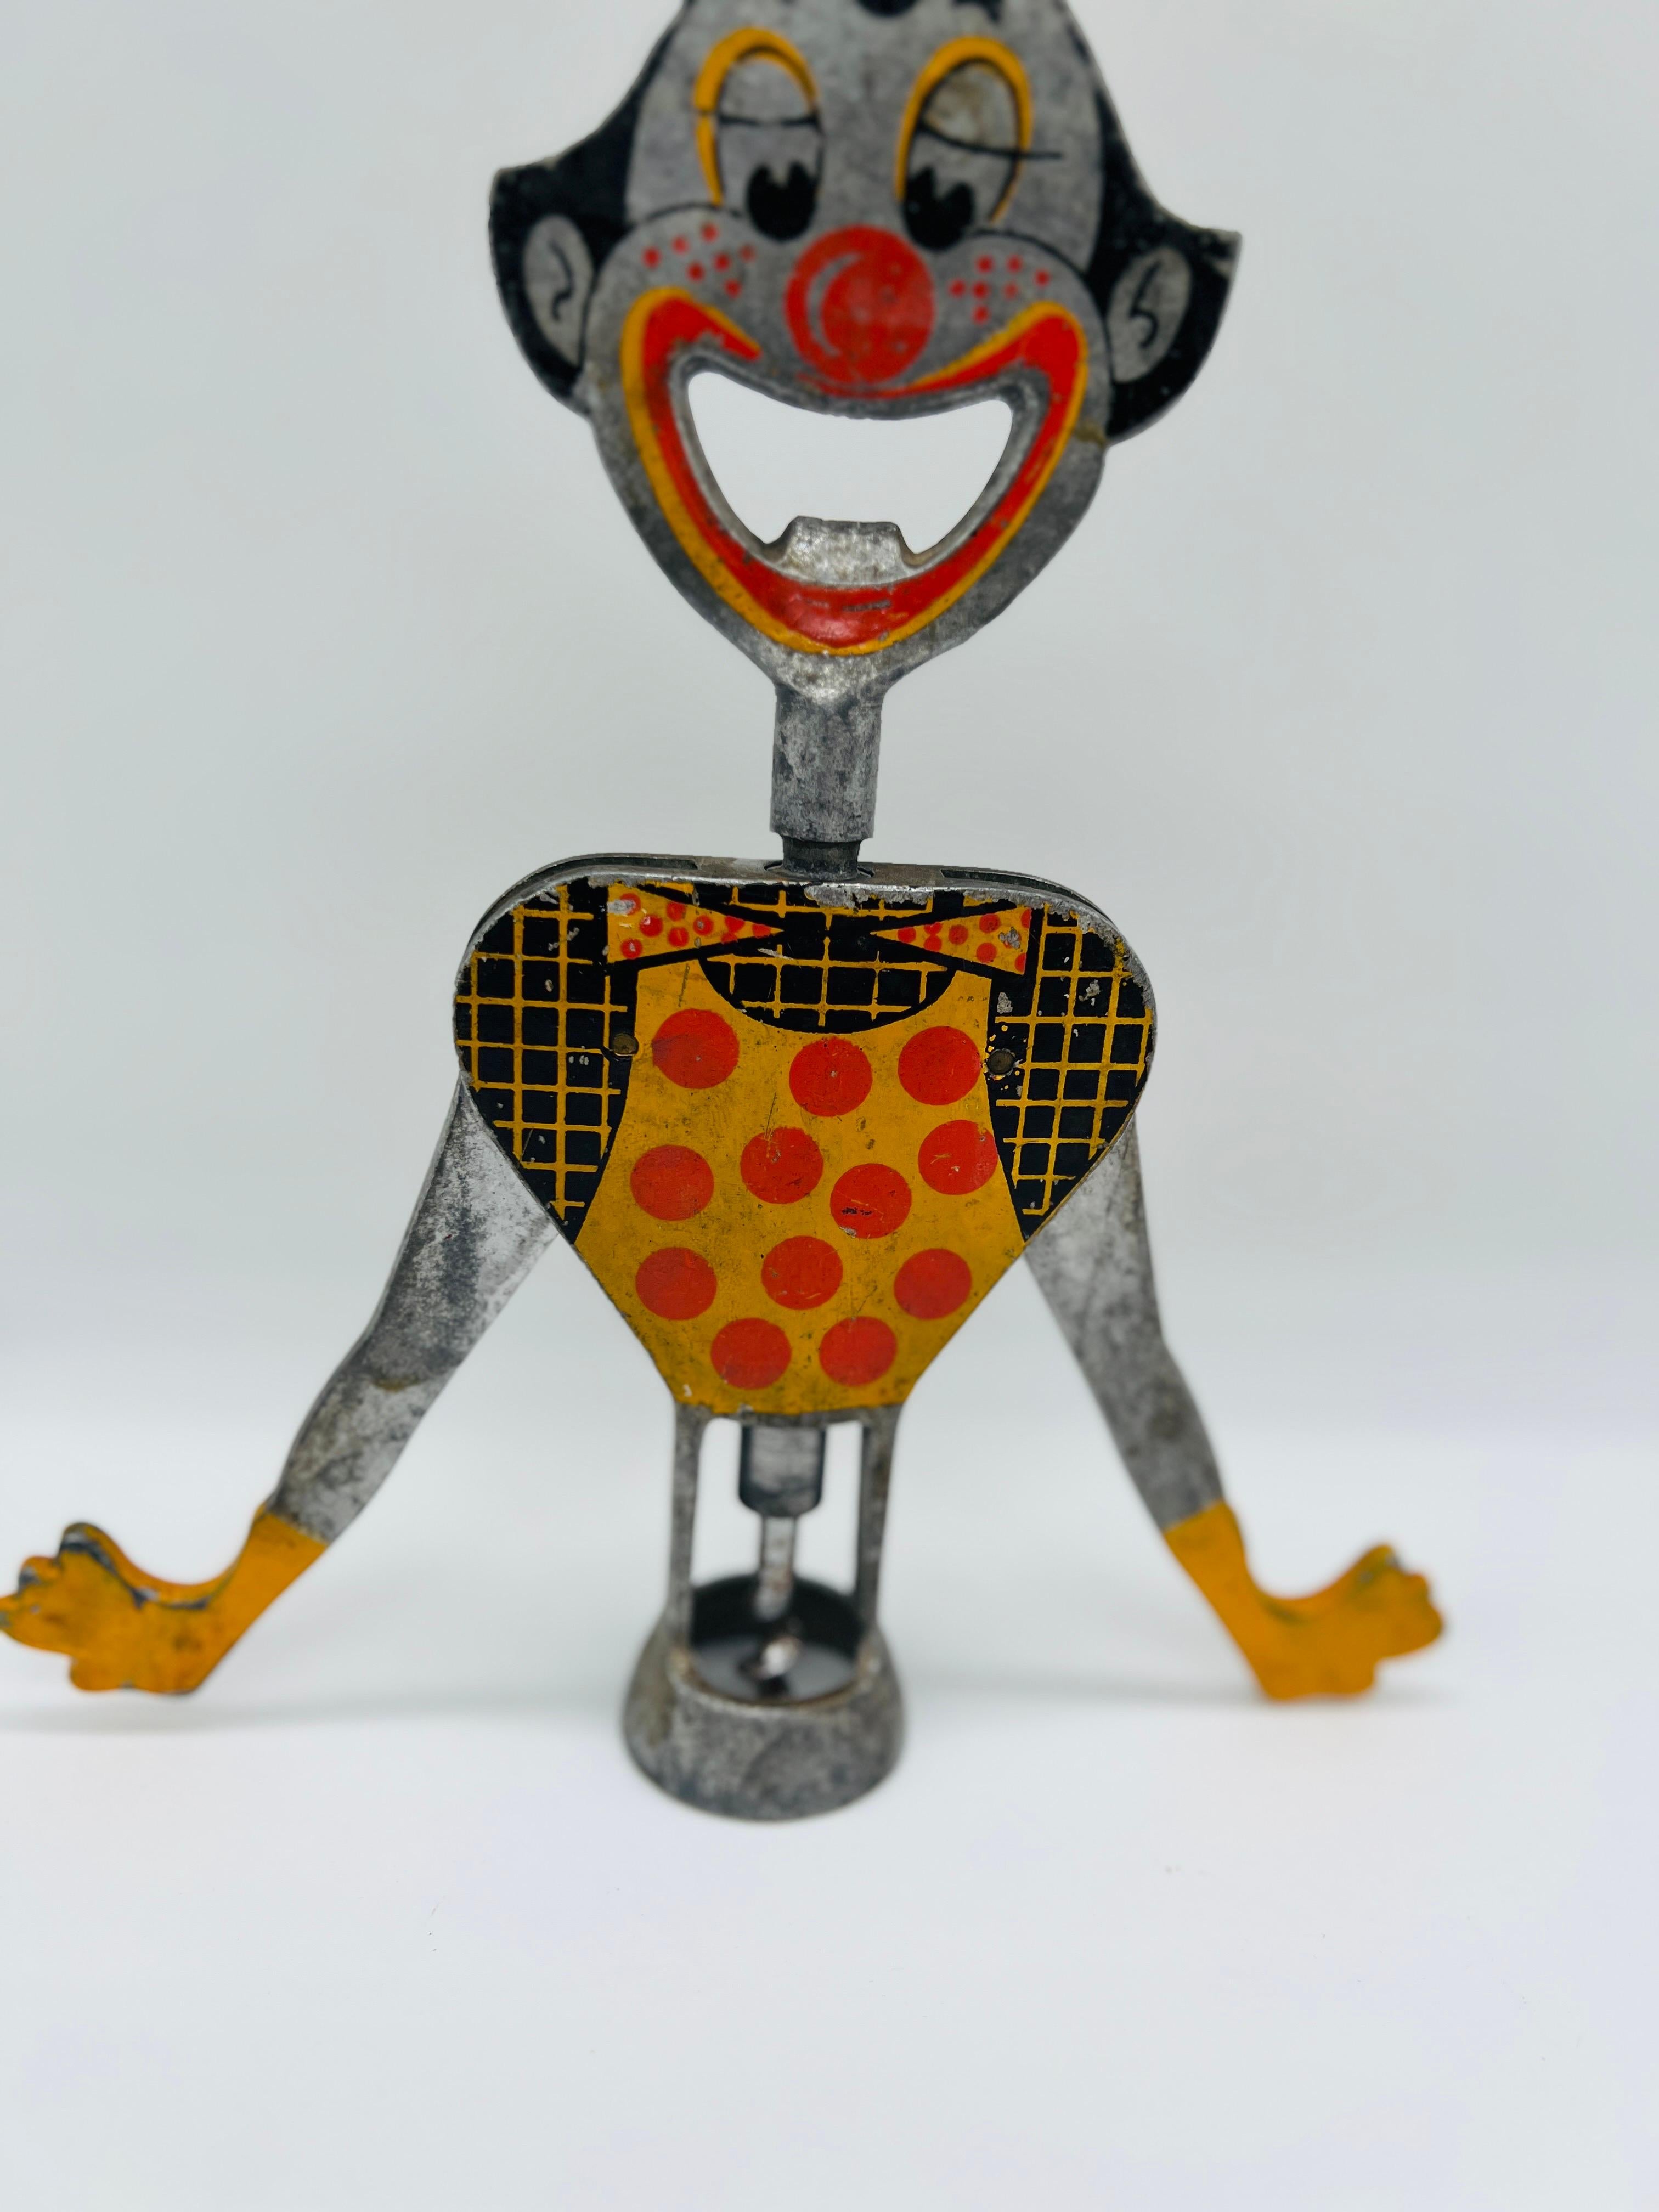 Based on Carlo Gemelli''s double lever design. A great conversation piece, it is yellow, black, and red painted on aluminum. The back of his body has a variety of drinking toasts in several languages. A great conversation piece for any vintage or